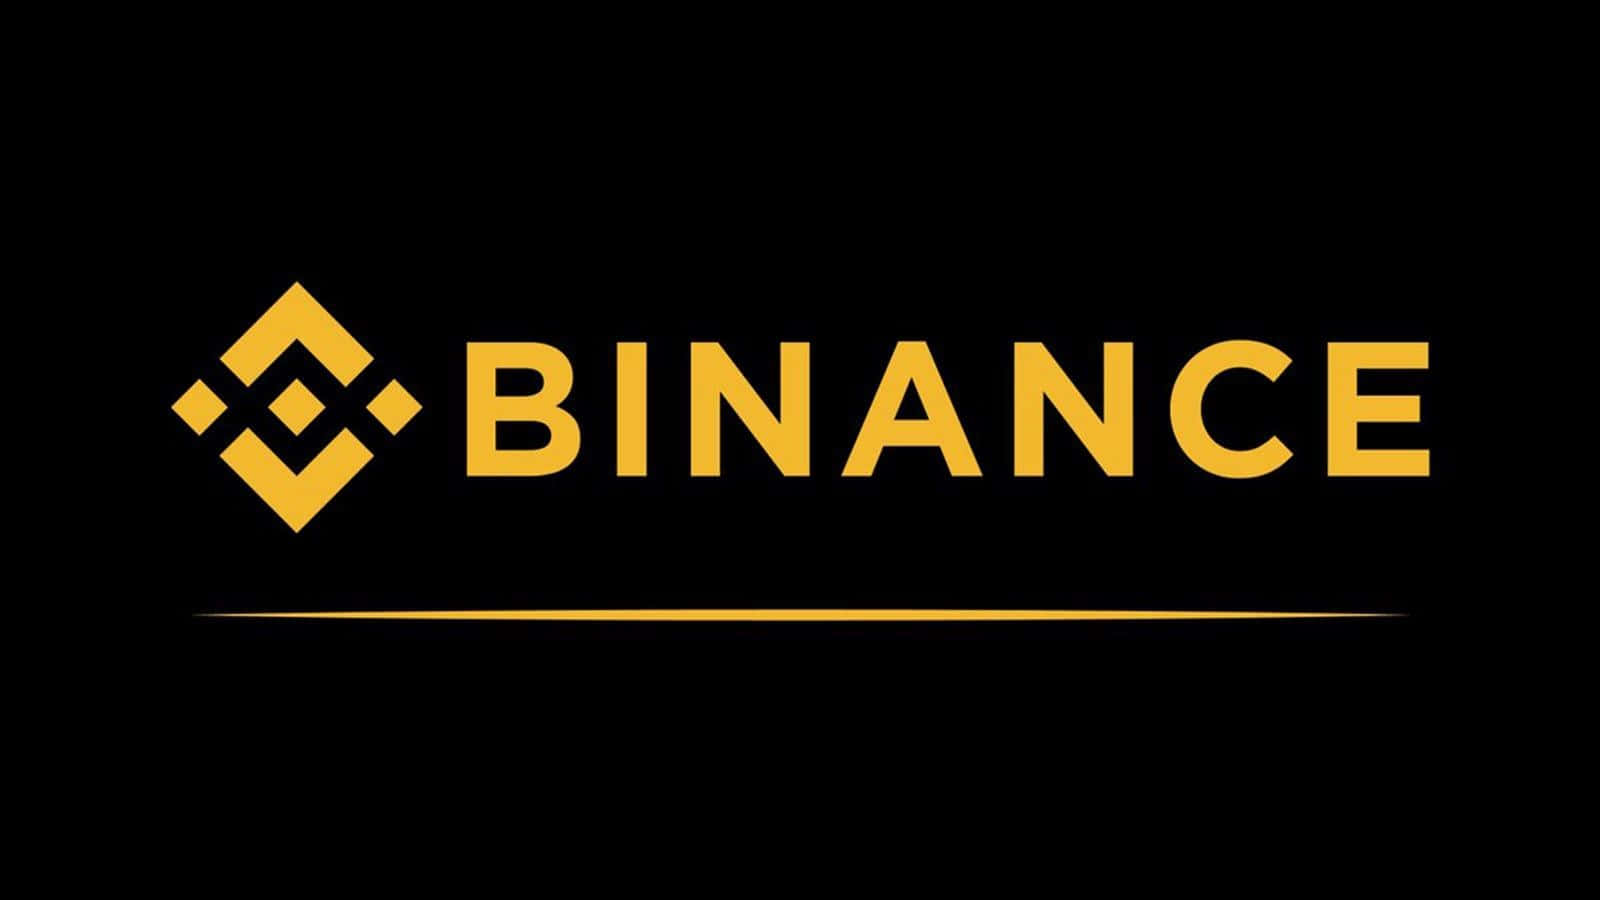 Get the most out of your investments with Binance